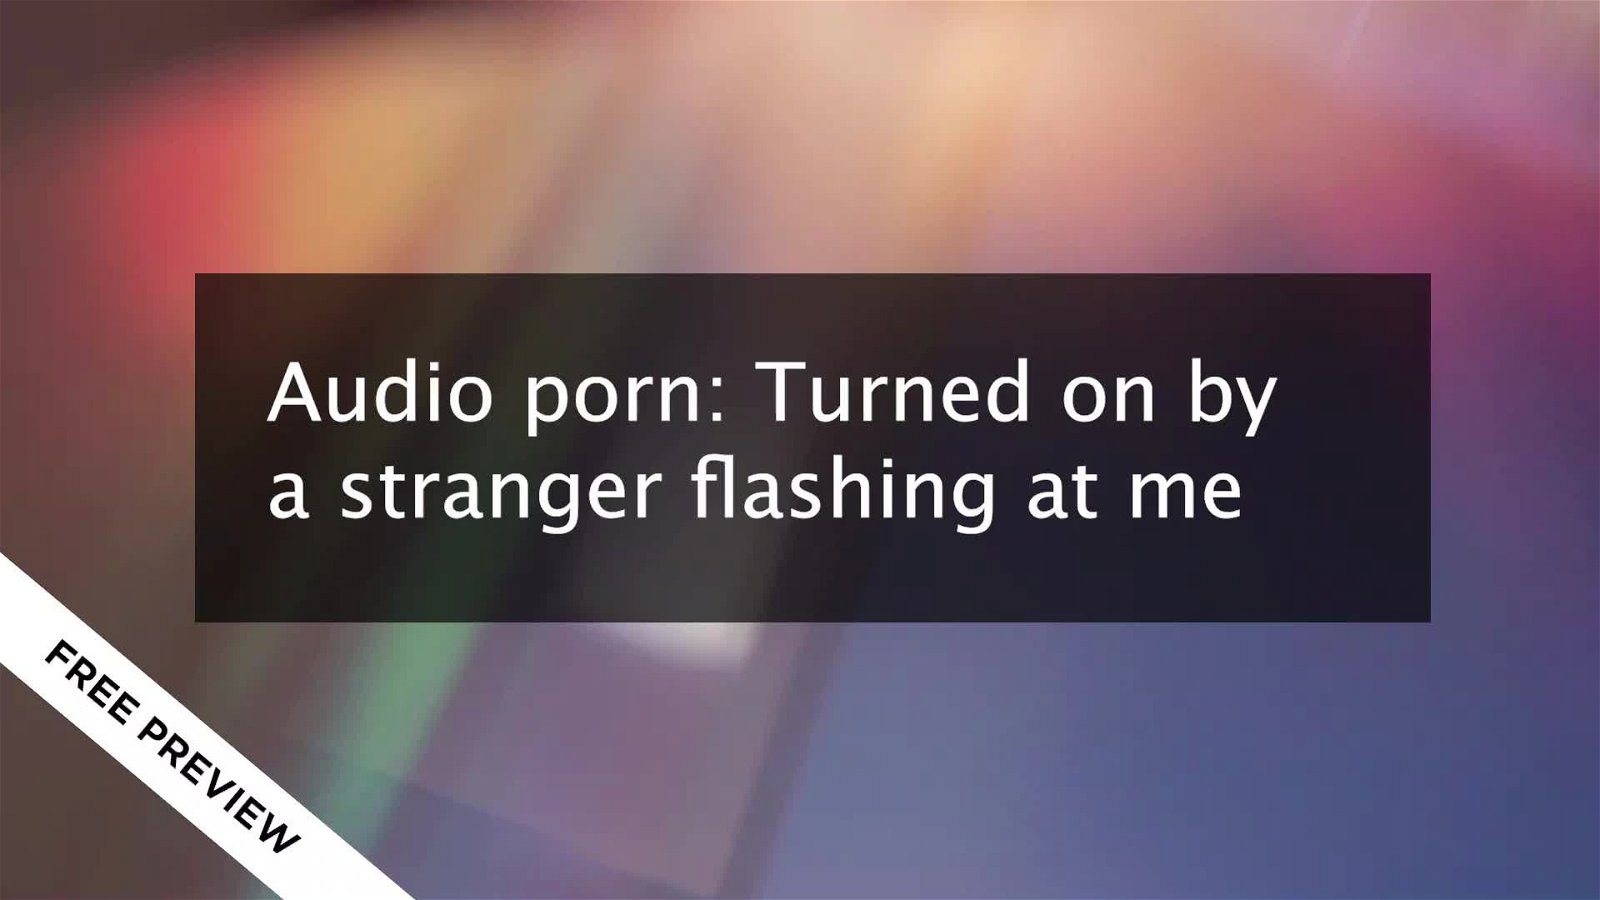 Watch the Video by jillyhorrorshow with the username @jillyhorrorshow, who is a star user, posted on July 12, 2023. The post is about the topic Flashers and Public Nudes. and the text says 'I got flashed at by a stranger, and it turned me on so much I made myself cum thinking about it. This is a free preview - hear the whole thing at https://www.fanvue.com/jillyhorrorshow (can't hear this clip on Sharesome? Try Chrome). 

#dirtytalk #voice..'